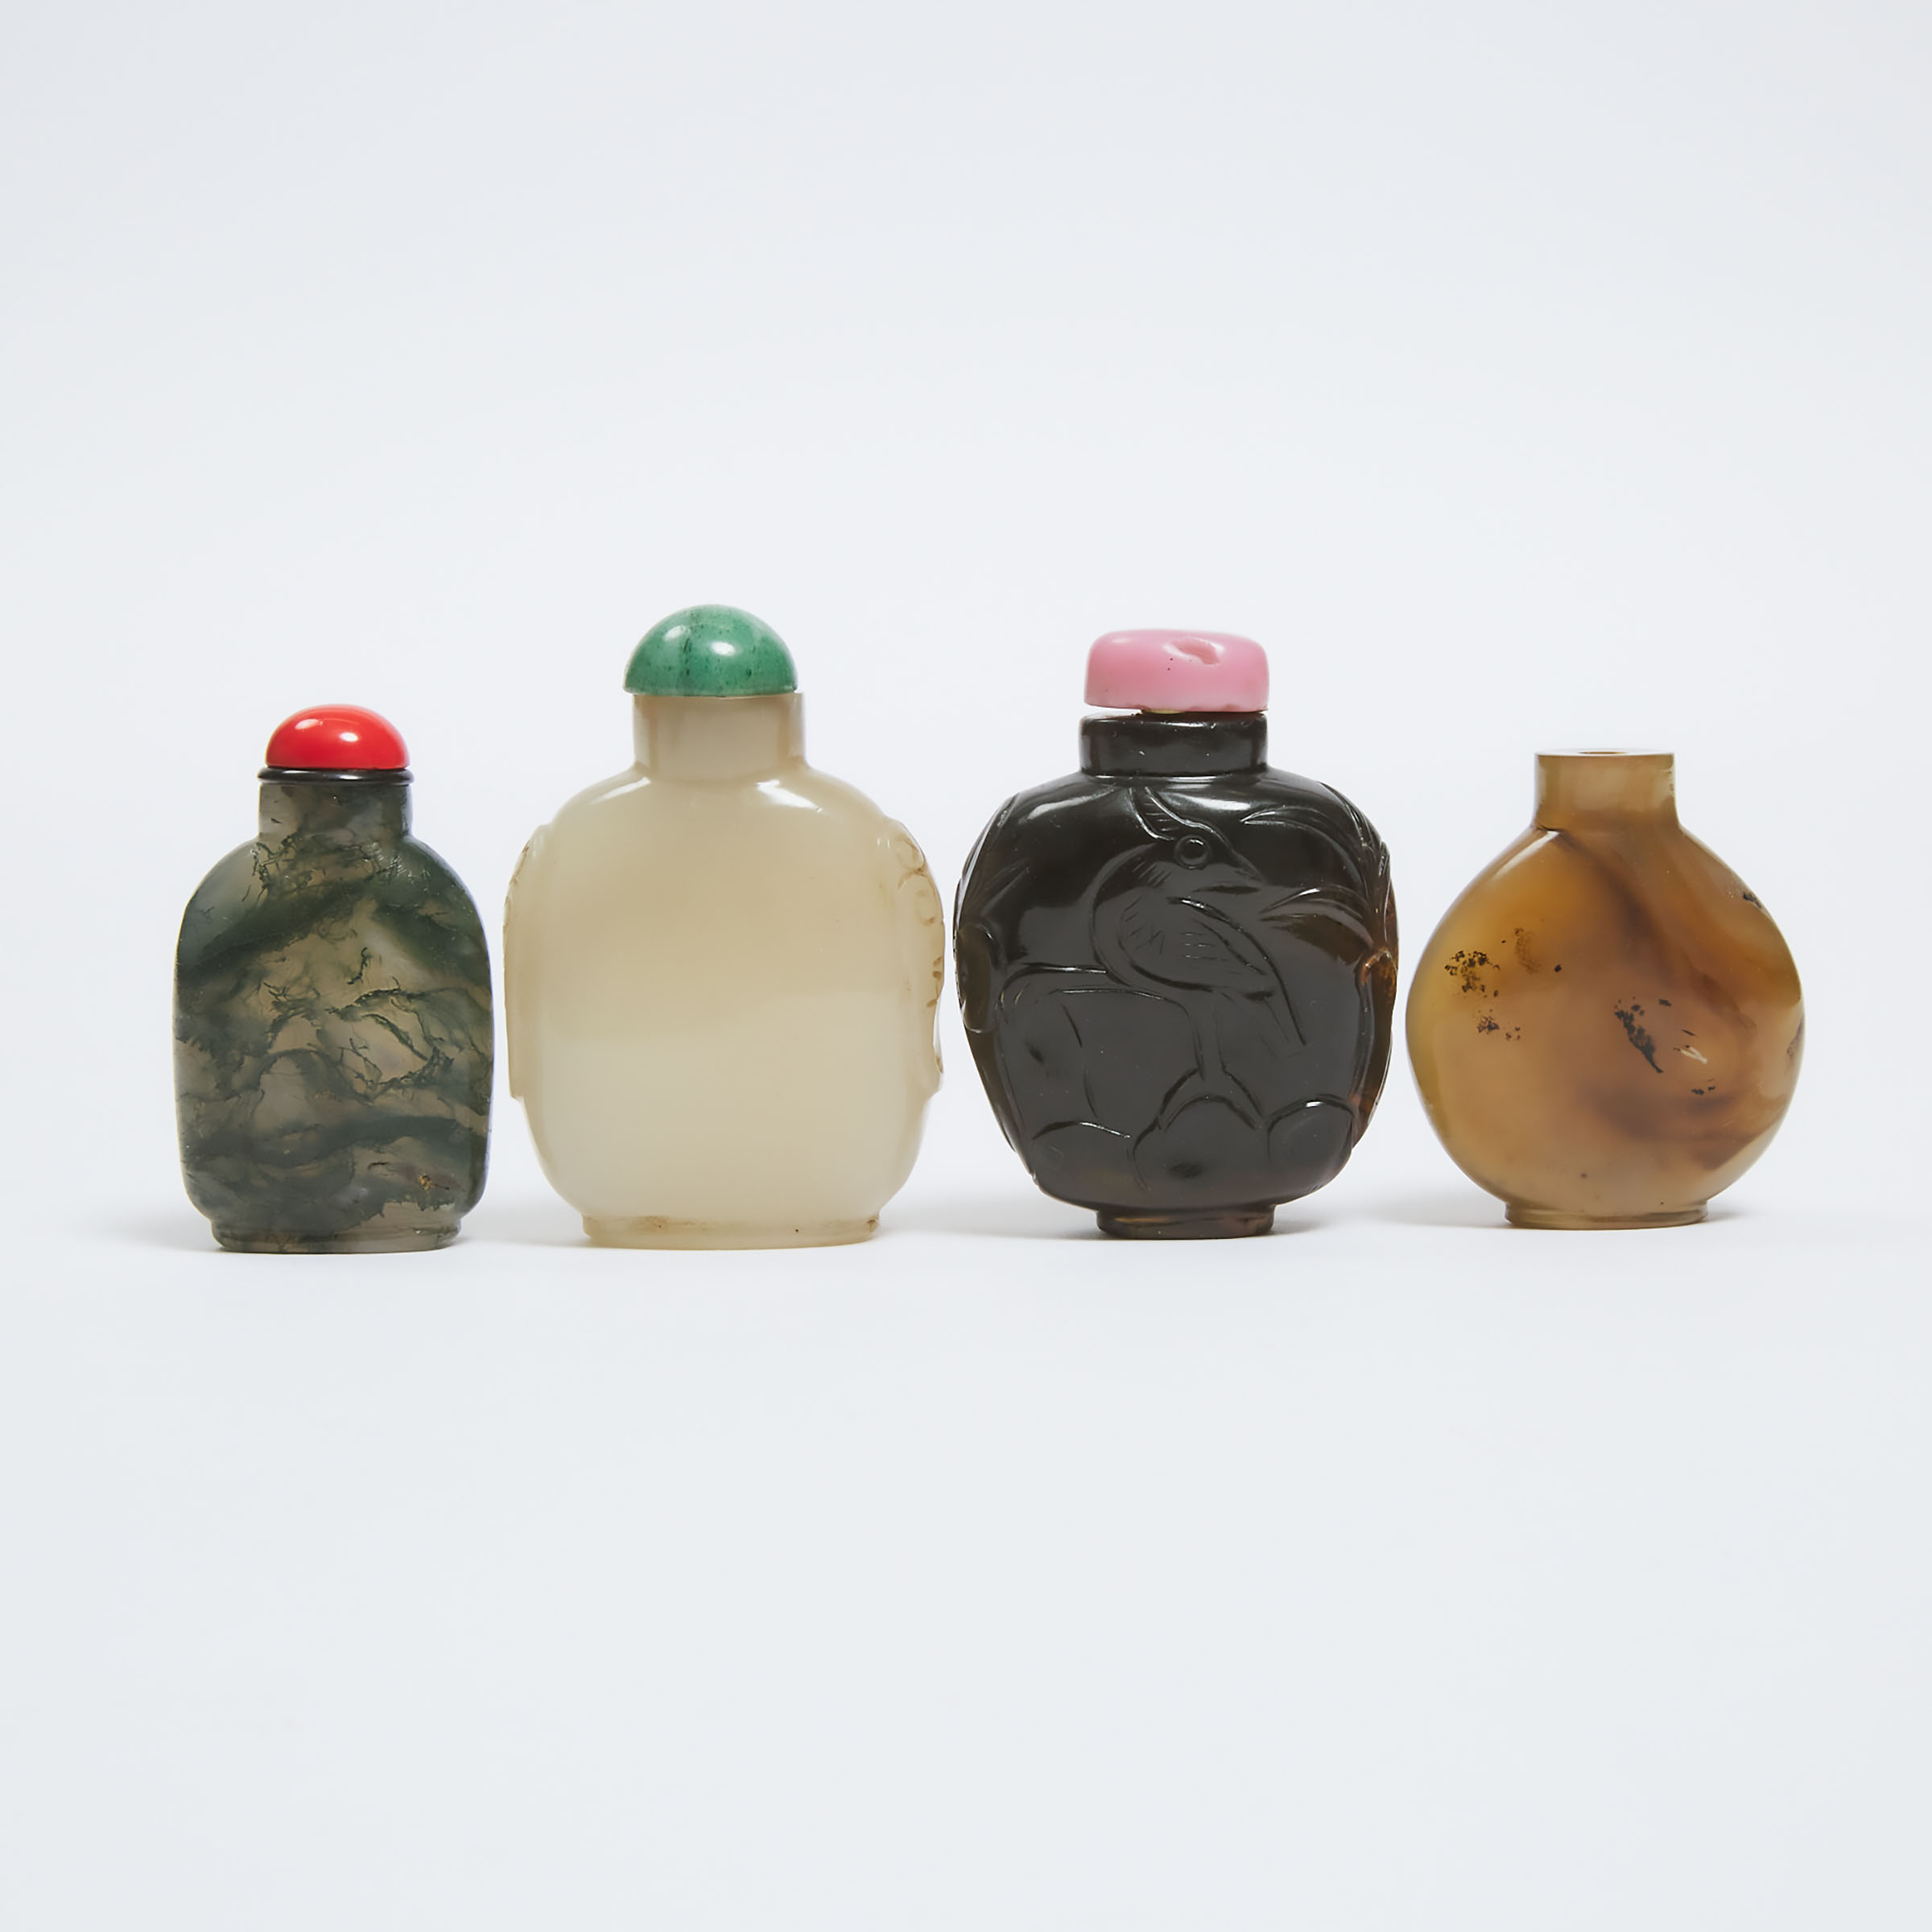 A Group of Four Agate Snuff Bottles, Qing Dynasty, 19th Century